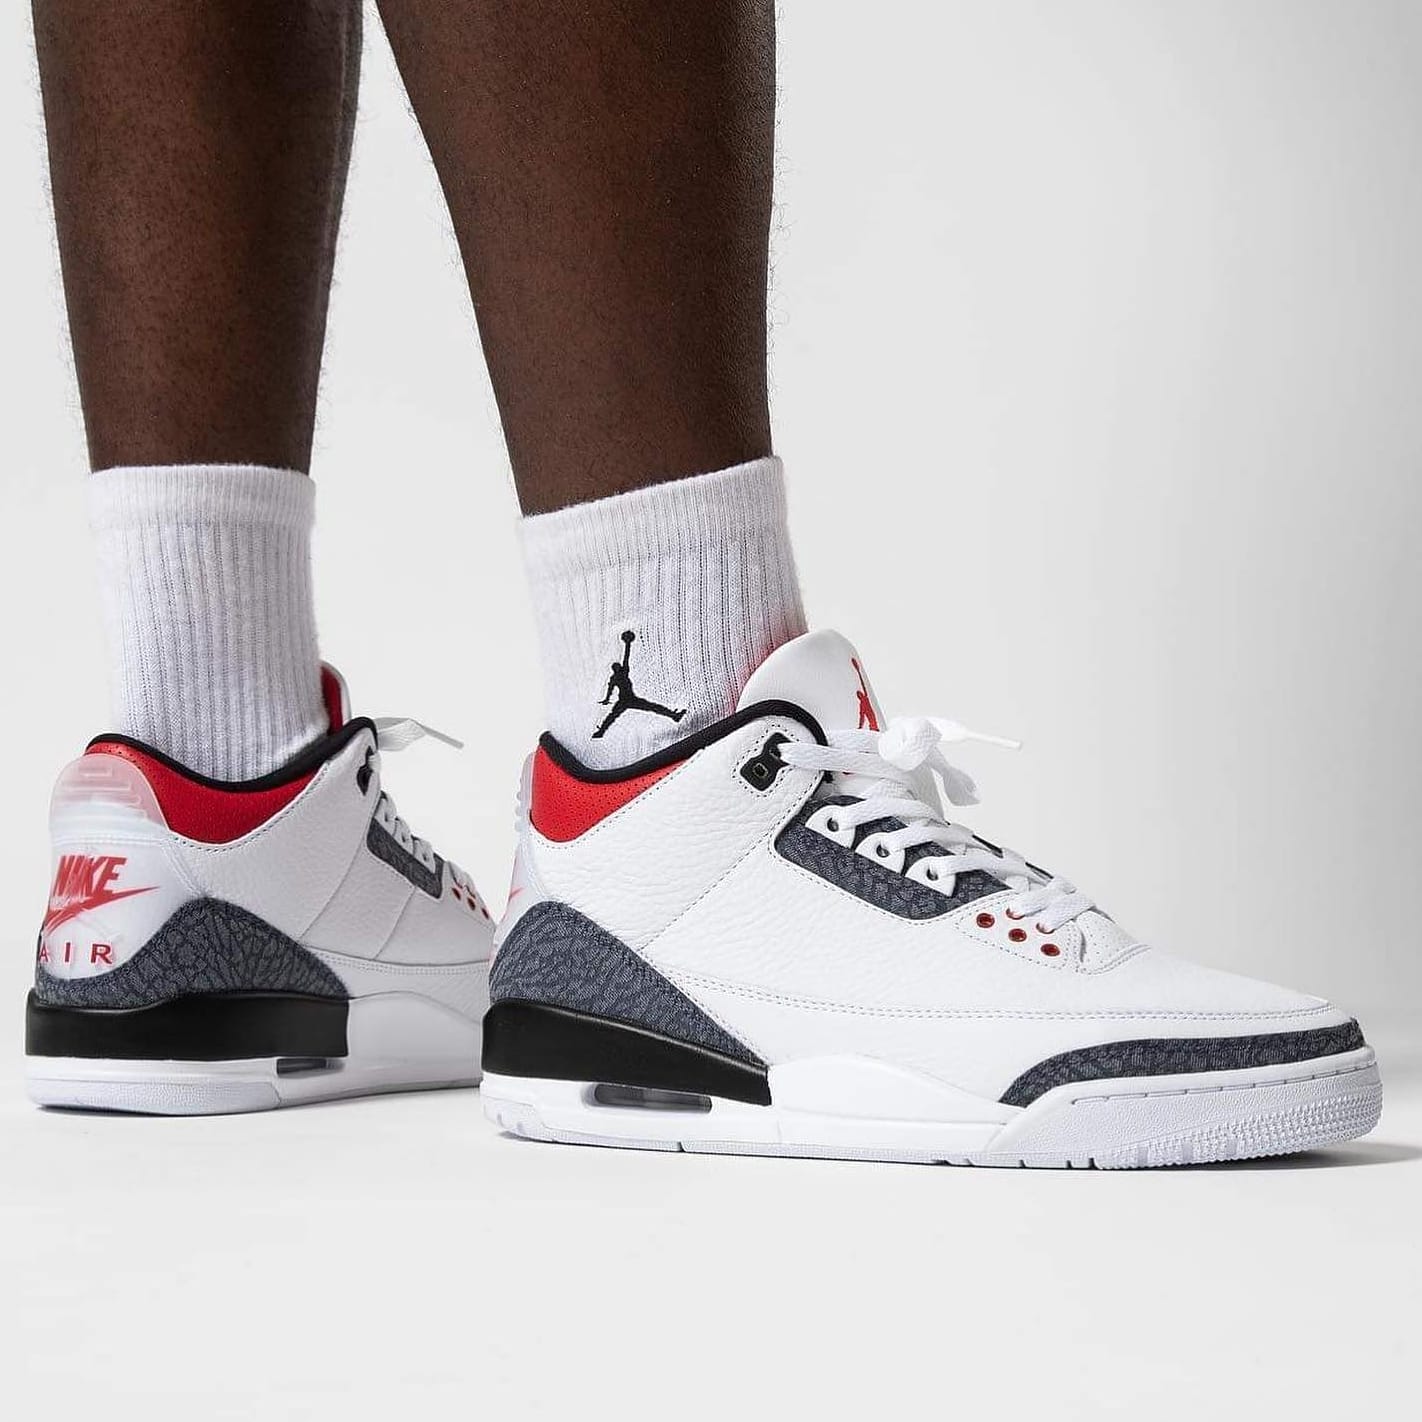 On-Foot Look At The Air Jordan 3 Retro SE “Fire Red”